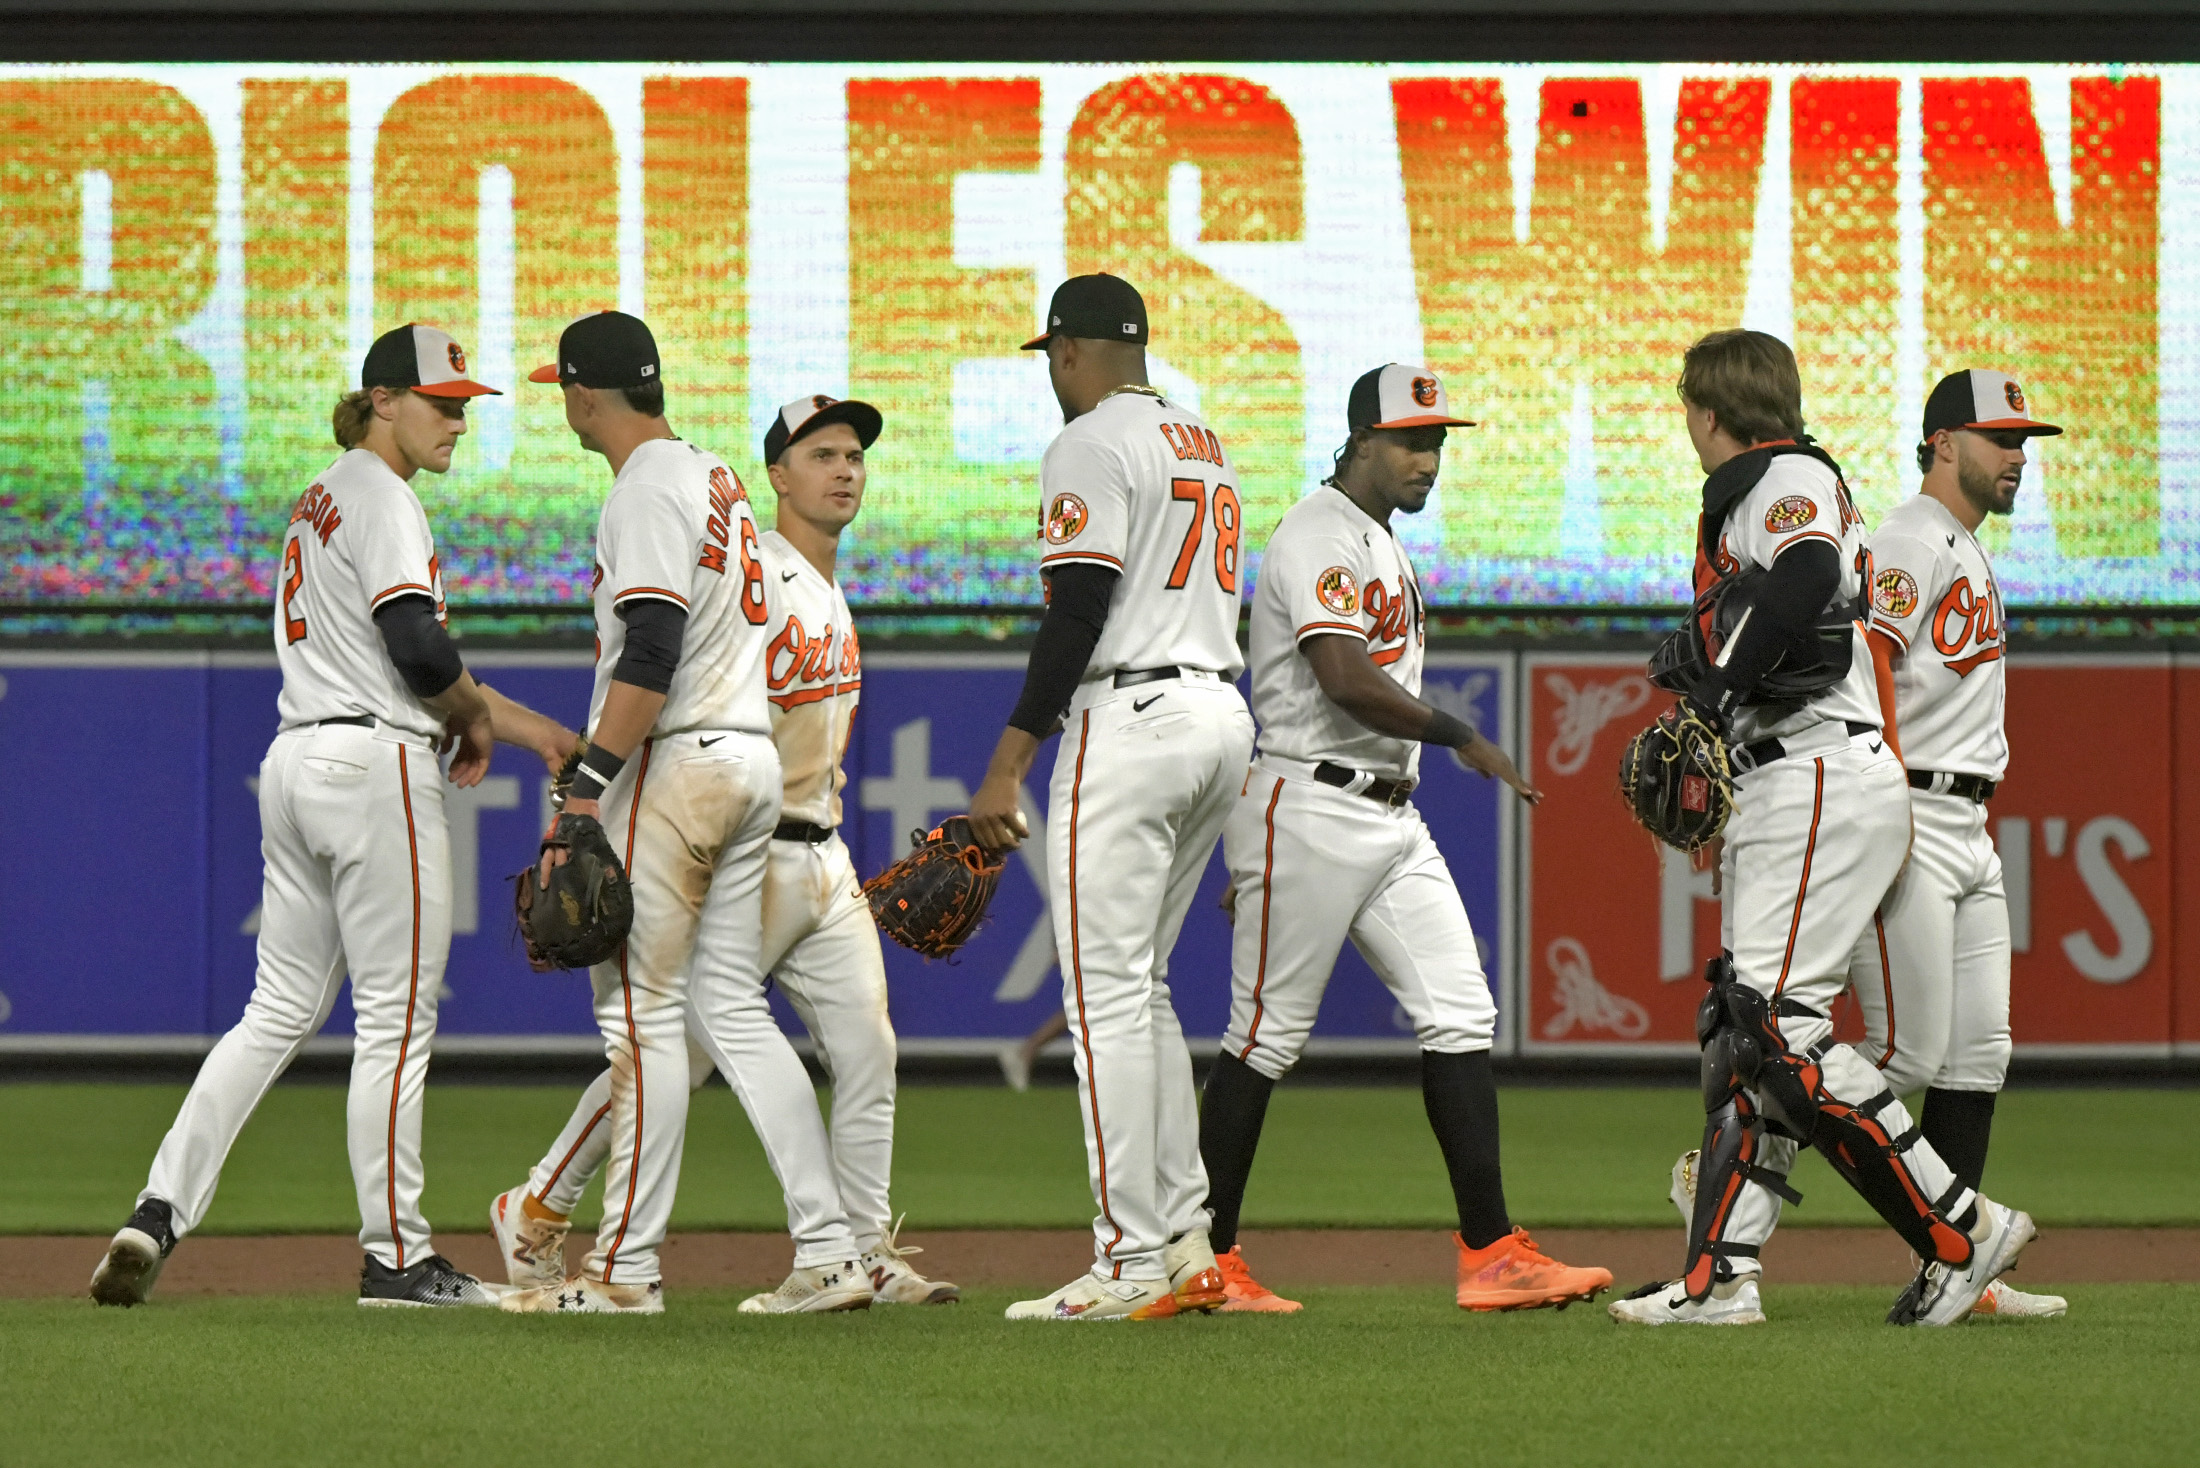 The Orioles' ability to beat baseball's best teams shows they are